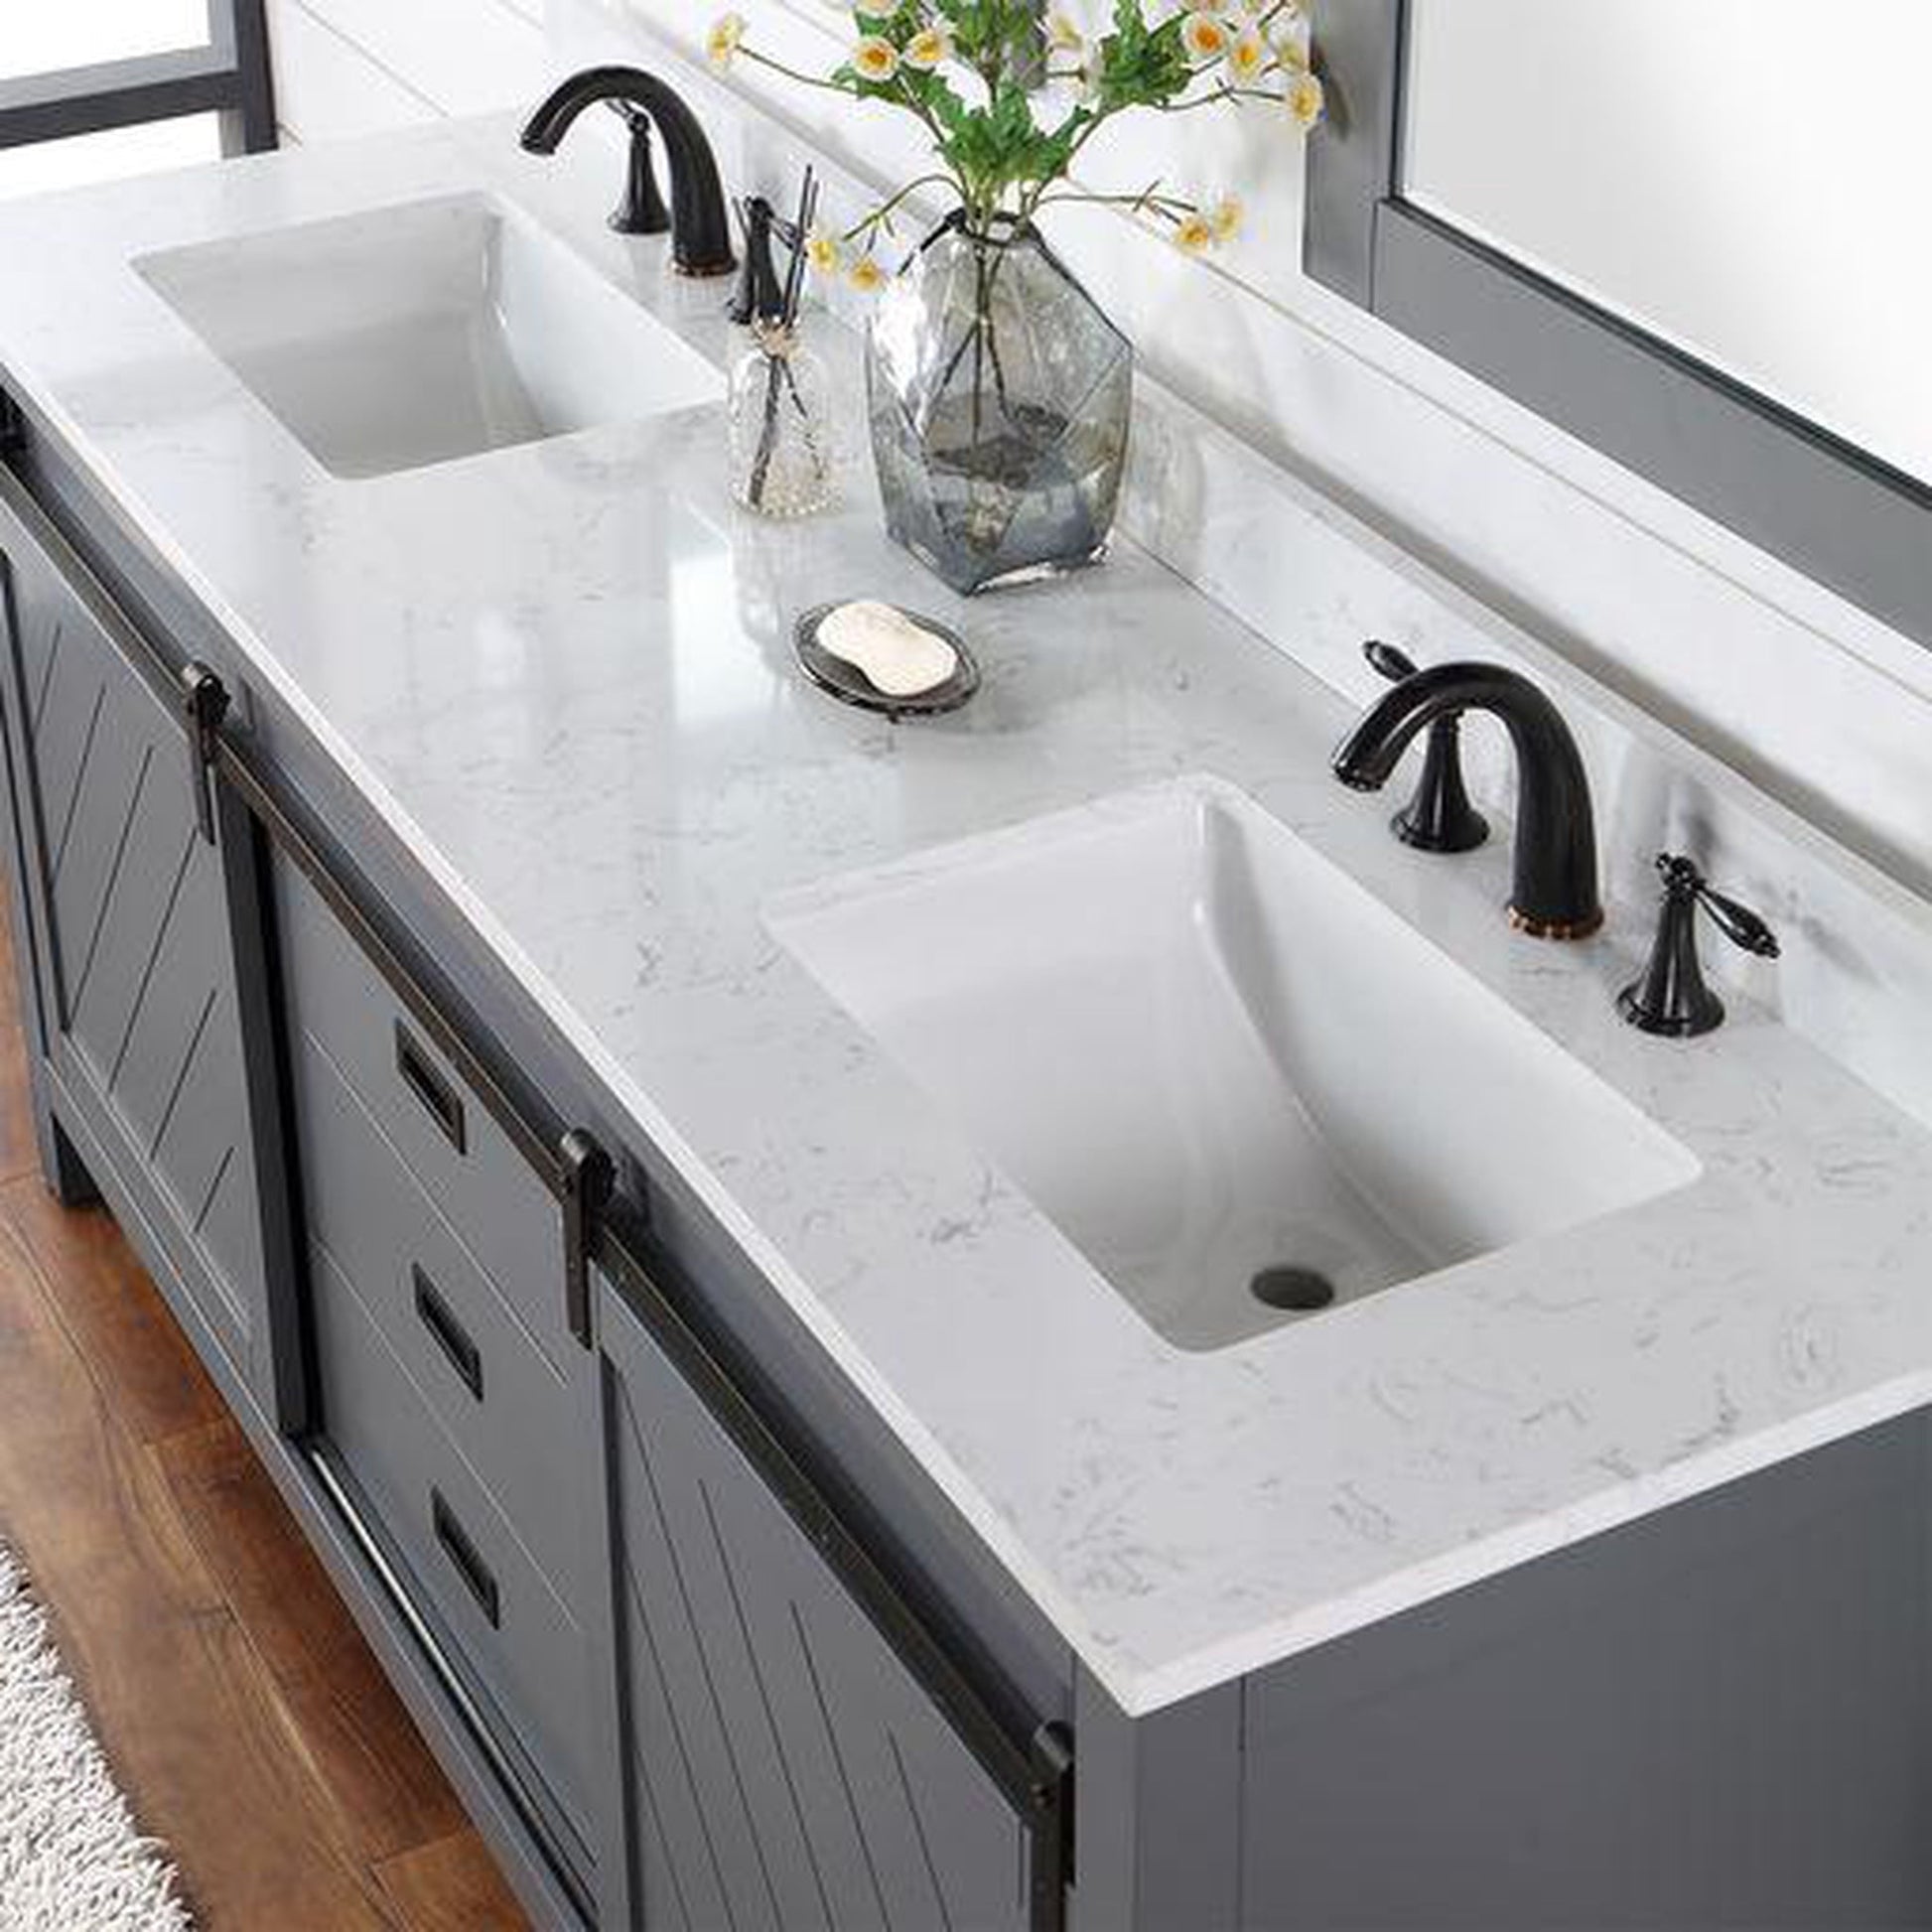 Altair Kinsley 72" Double Gray Freestanding Bathroom Vanity Set With Mirror, Aosta White Composite Stone Top, Two Rectangular Undermount Ceramic Sinks, and Overflow